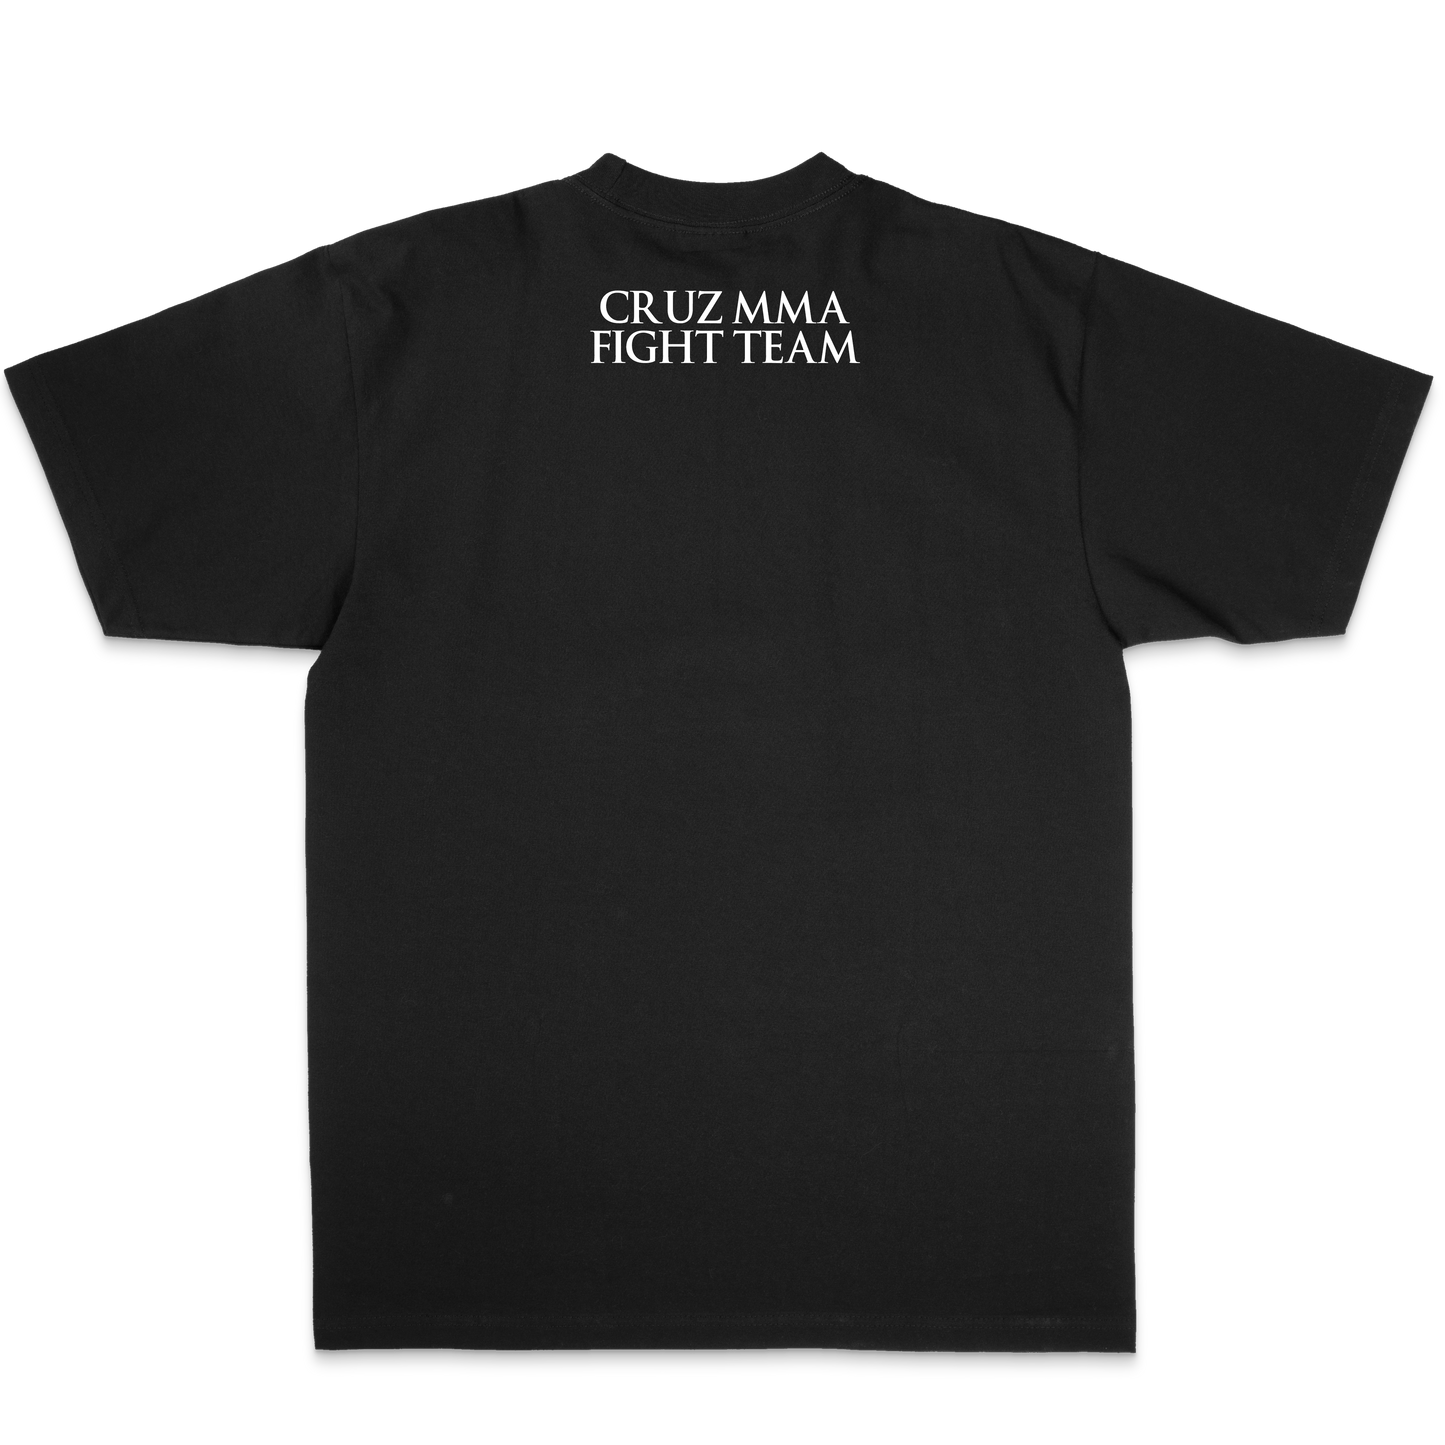 Coach of the Year "Classic" Tee in Black